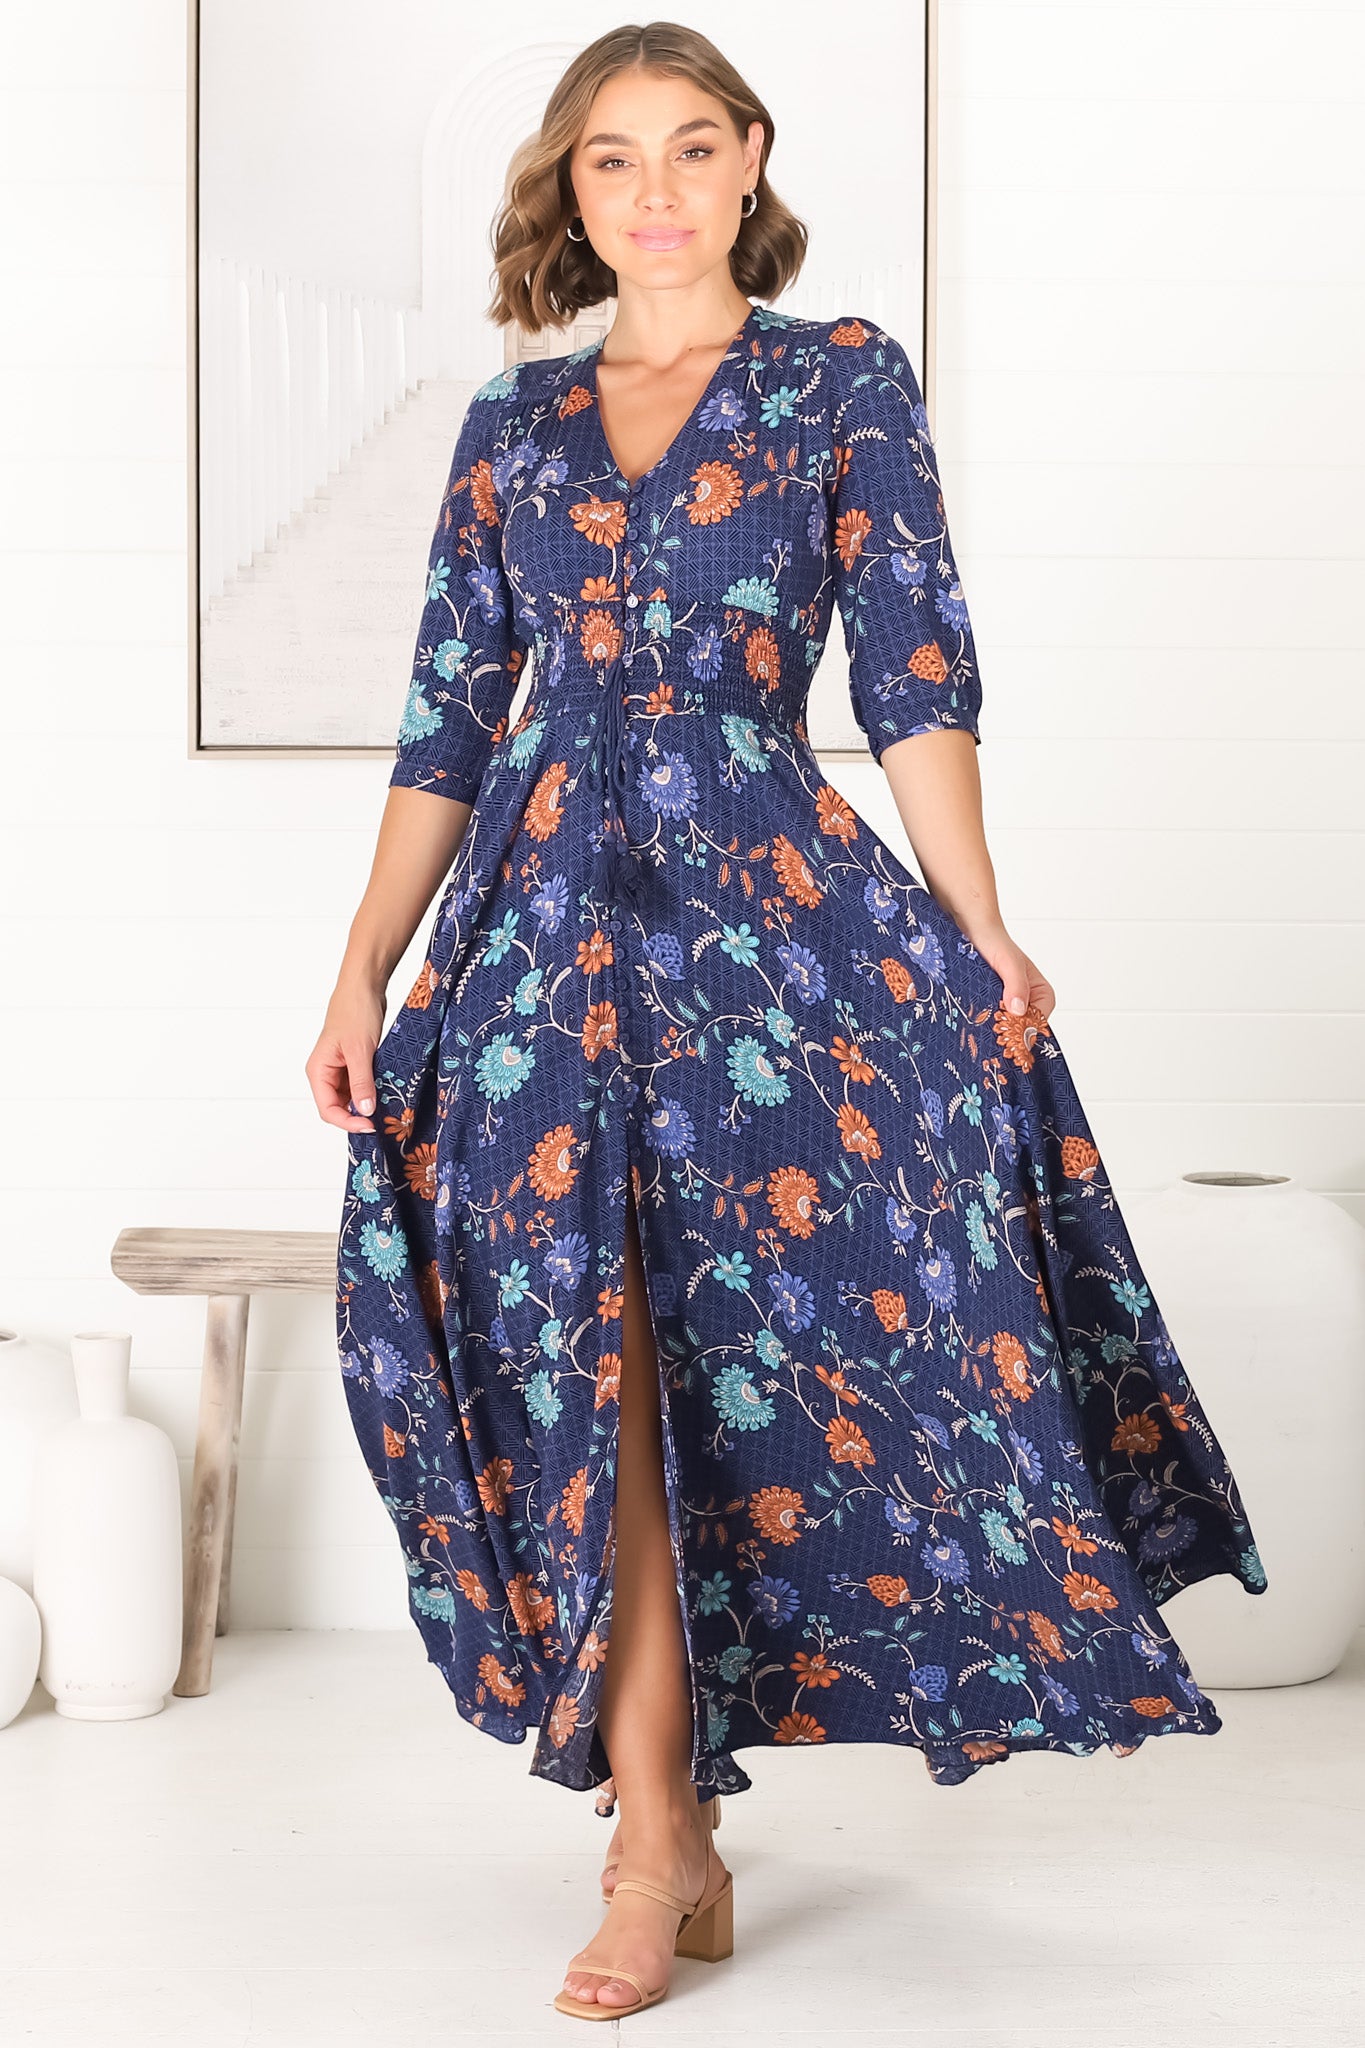 JAASE - Indiana Maxi Dress: Lace Back Shirred Waist A Line Dress with Handkercheif Hemline in Reeves Print